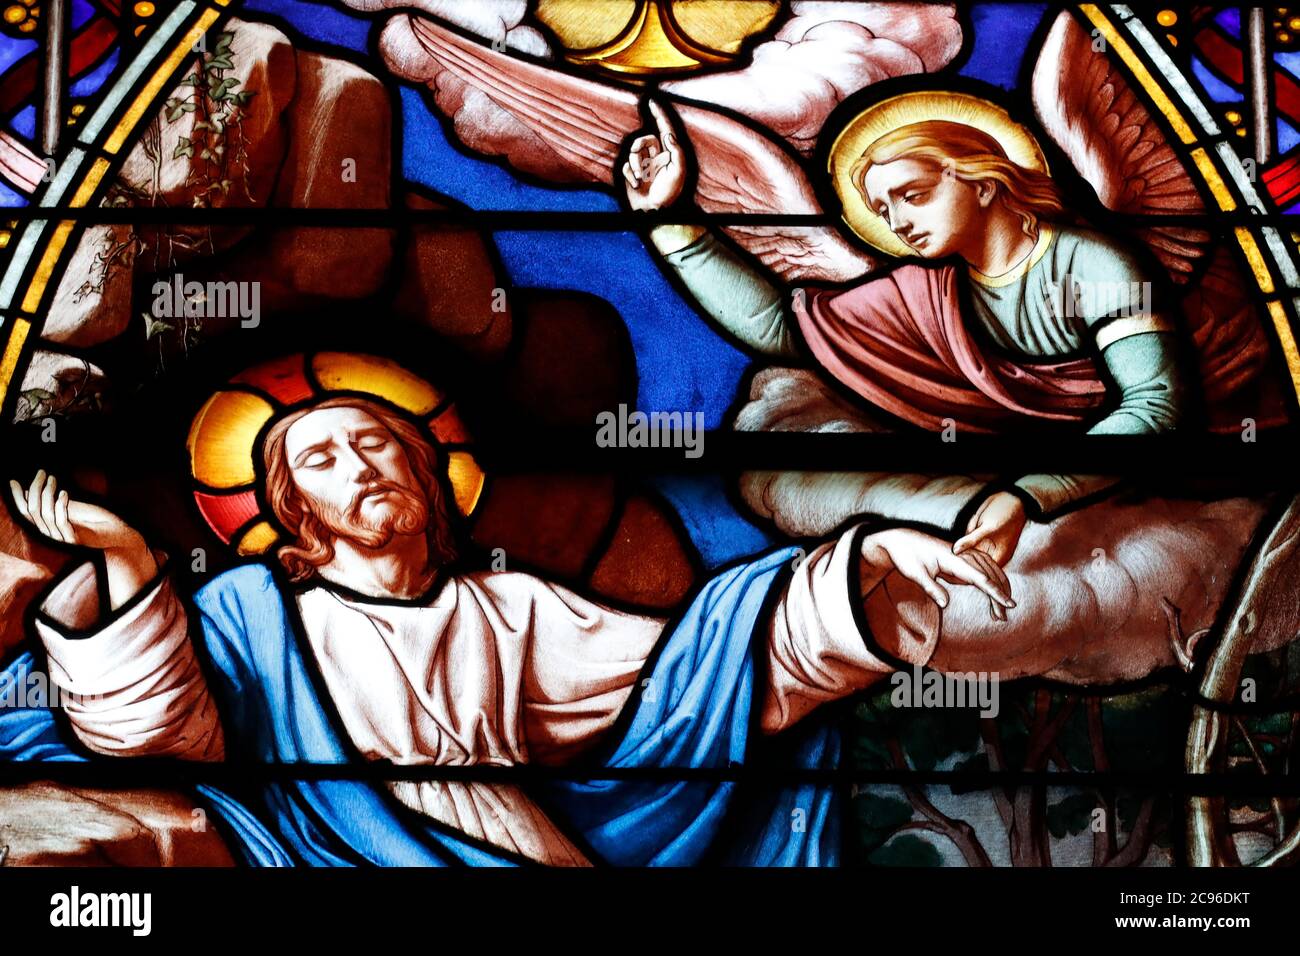 Basilica of Our Lady of Geneva.  Stained glass window.  Jesus praying in the garden of Gethsemane  after the Last Supper, while the disciples sleep. G Stock Photo